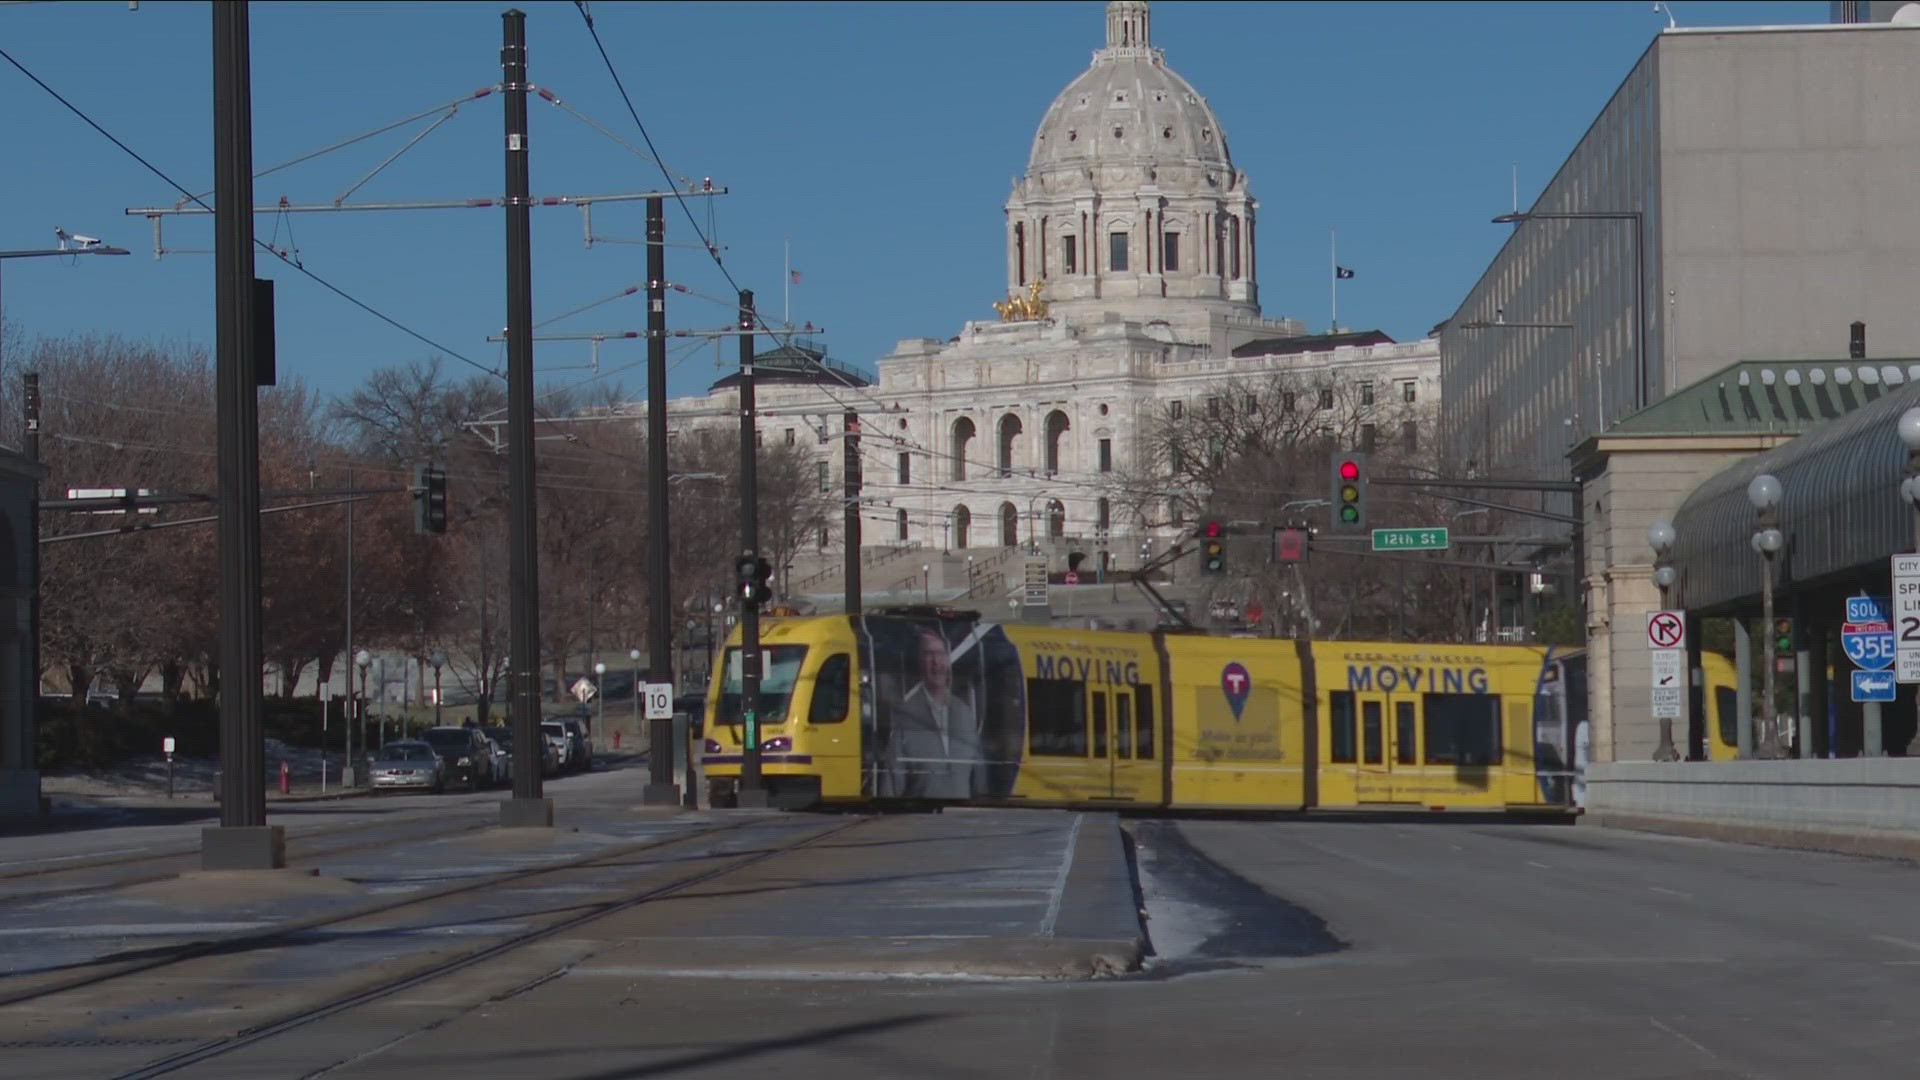 The NFTA mentions the Minneapolis Light Rail project as a model for what they hope to do with their project and acknowledge resident and town concerns...